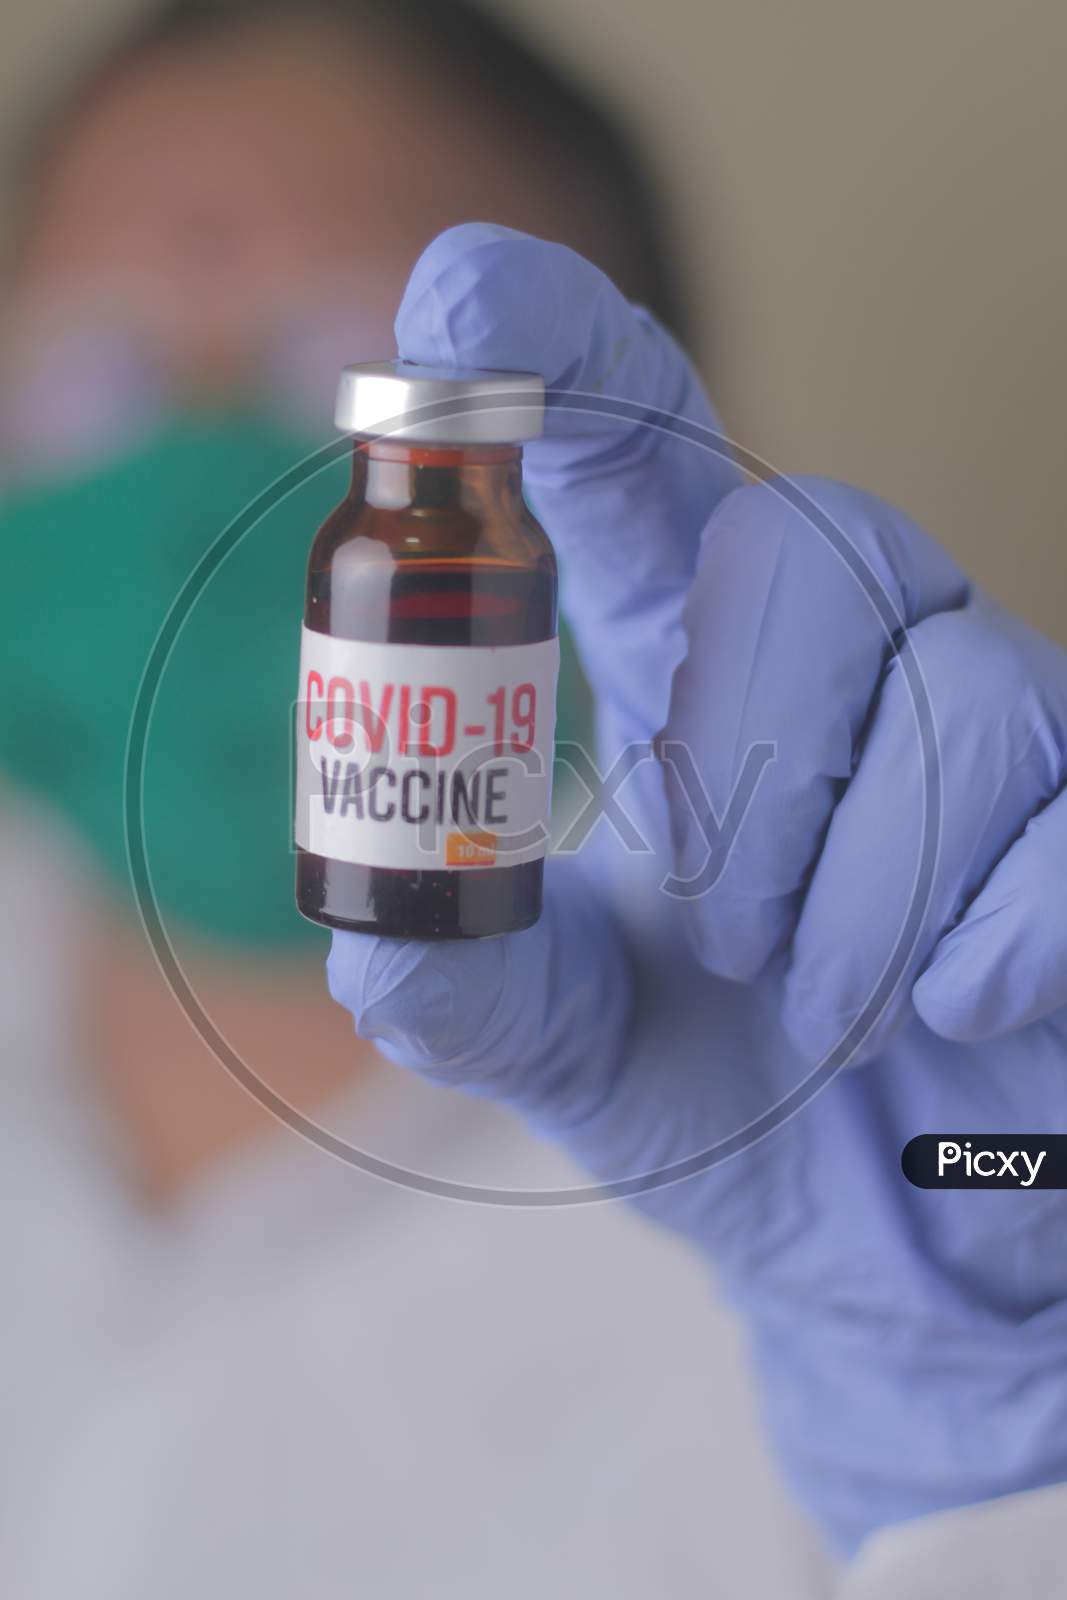 Doctor, Nurse, Scientist, Researcher Hand In Blue Gloves Holding Flu, Measles, Coronavirus, Covid-19 Vaccine Disease Preparing For Human Clinical Trials Vaccination Shot, Medicine And Drug Concept.